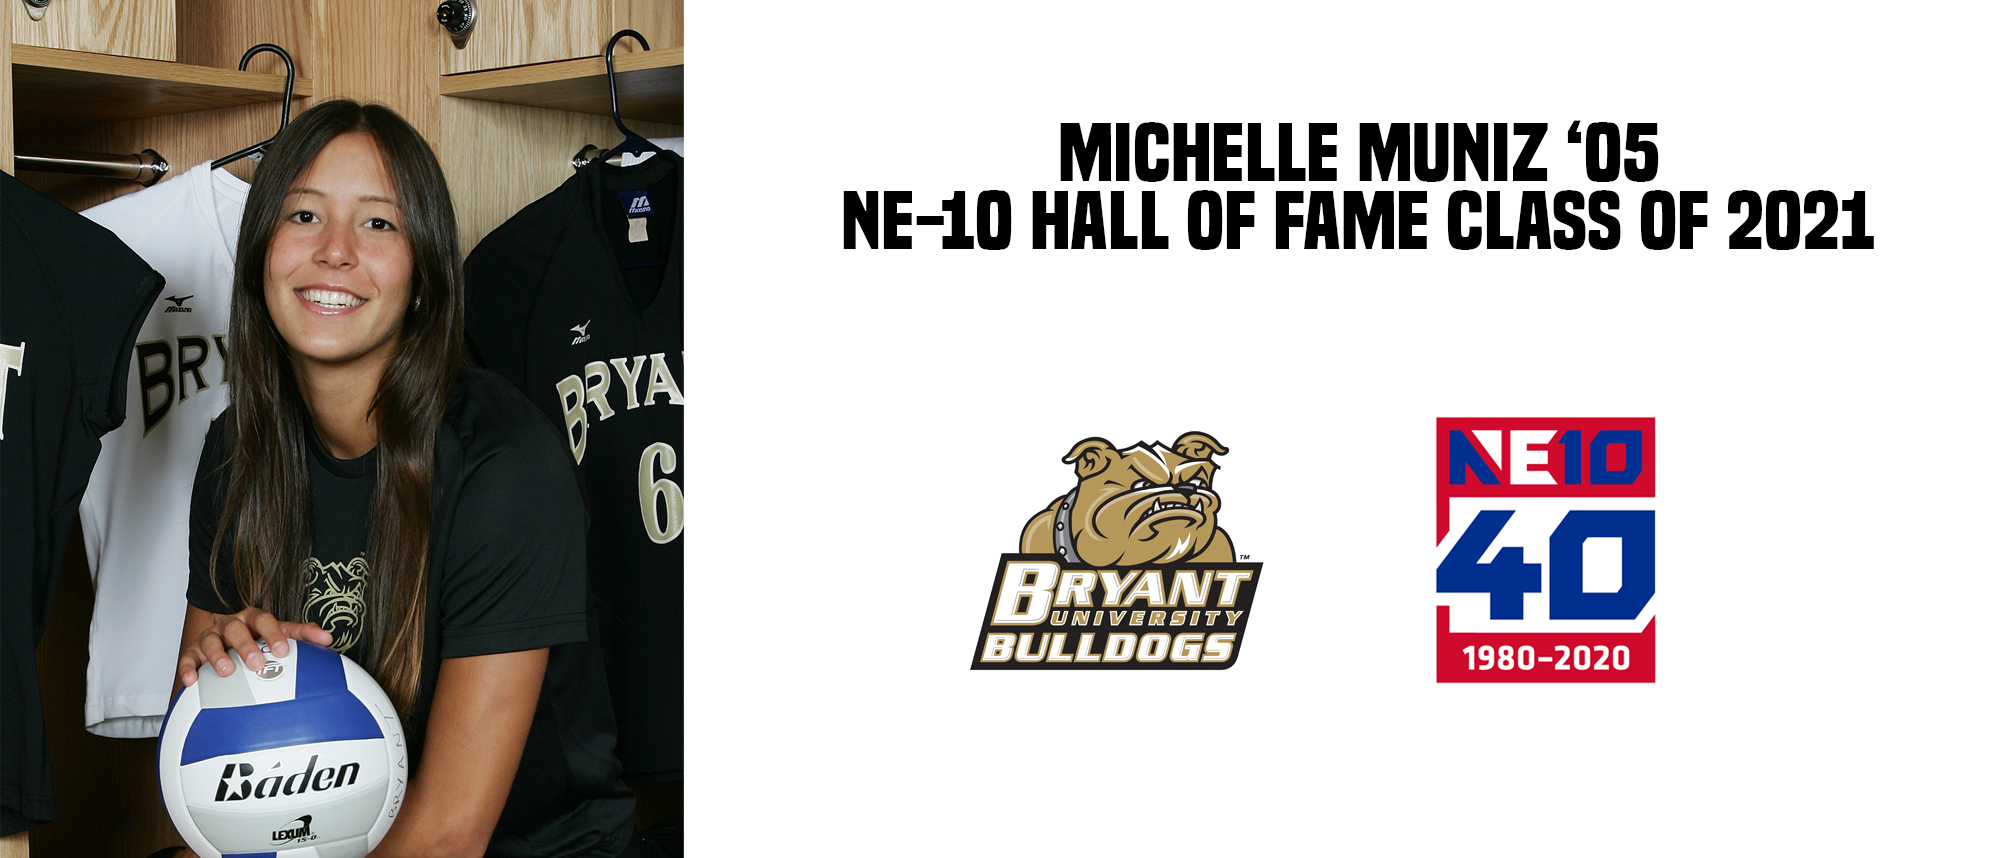 Michelle Muniz '06 inducted into NE-10 Hall of Fame